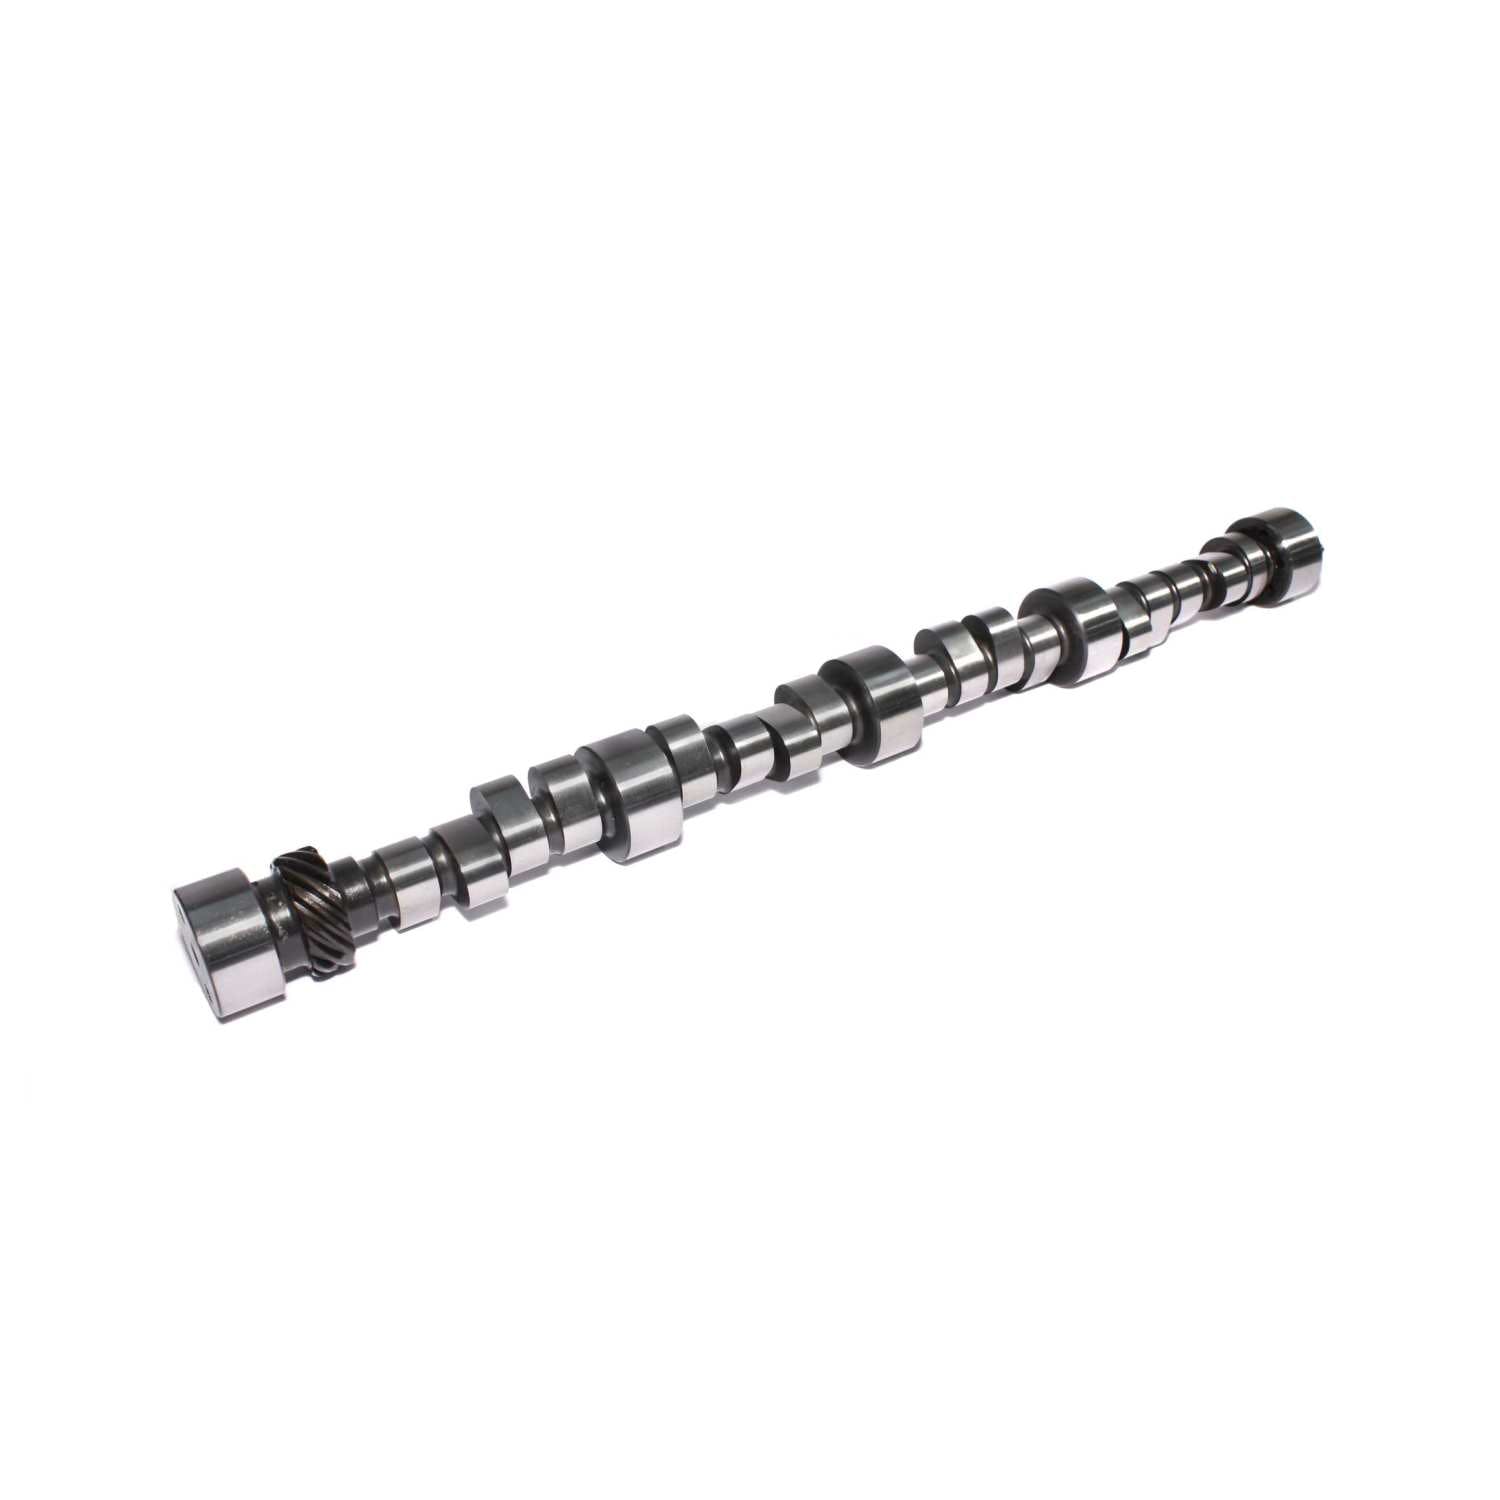 Competition Cams 11-718-9 Drag Race Camshaft